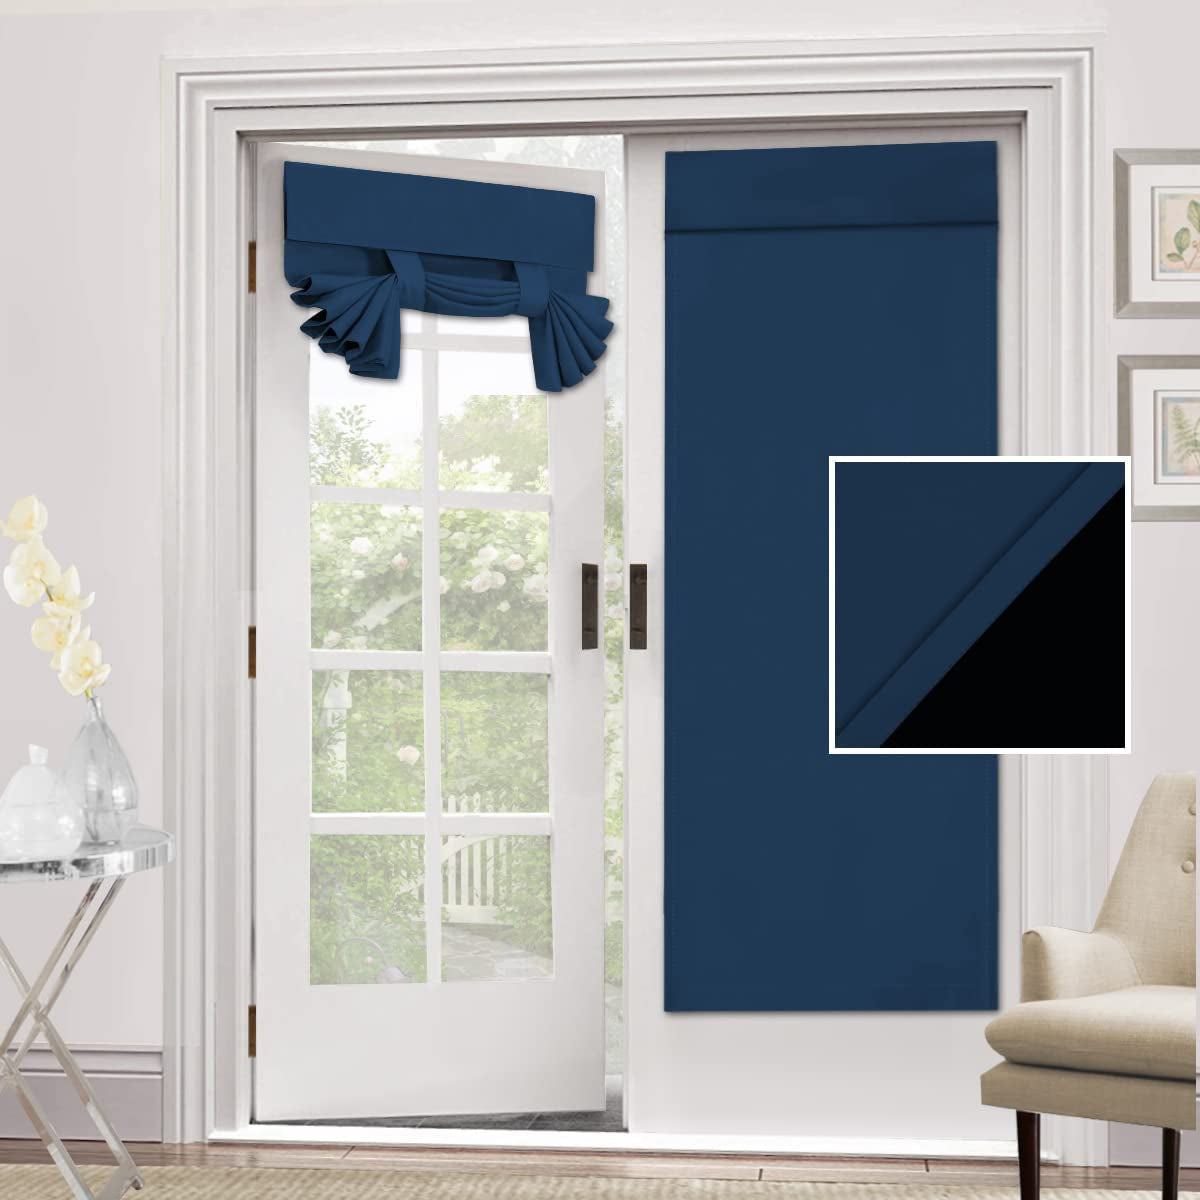  PI Blackout French Door Curtain,Privacy Thermal